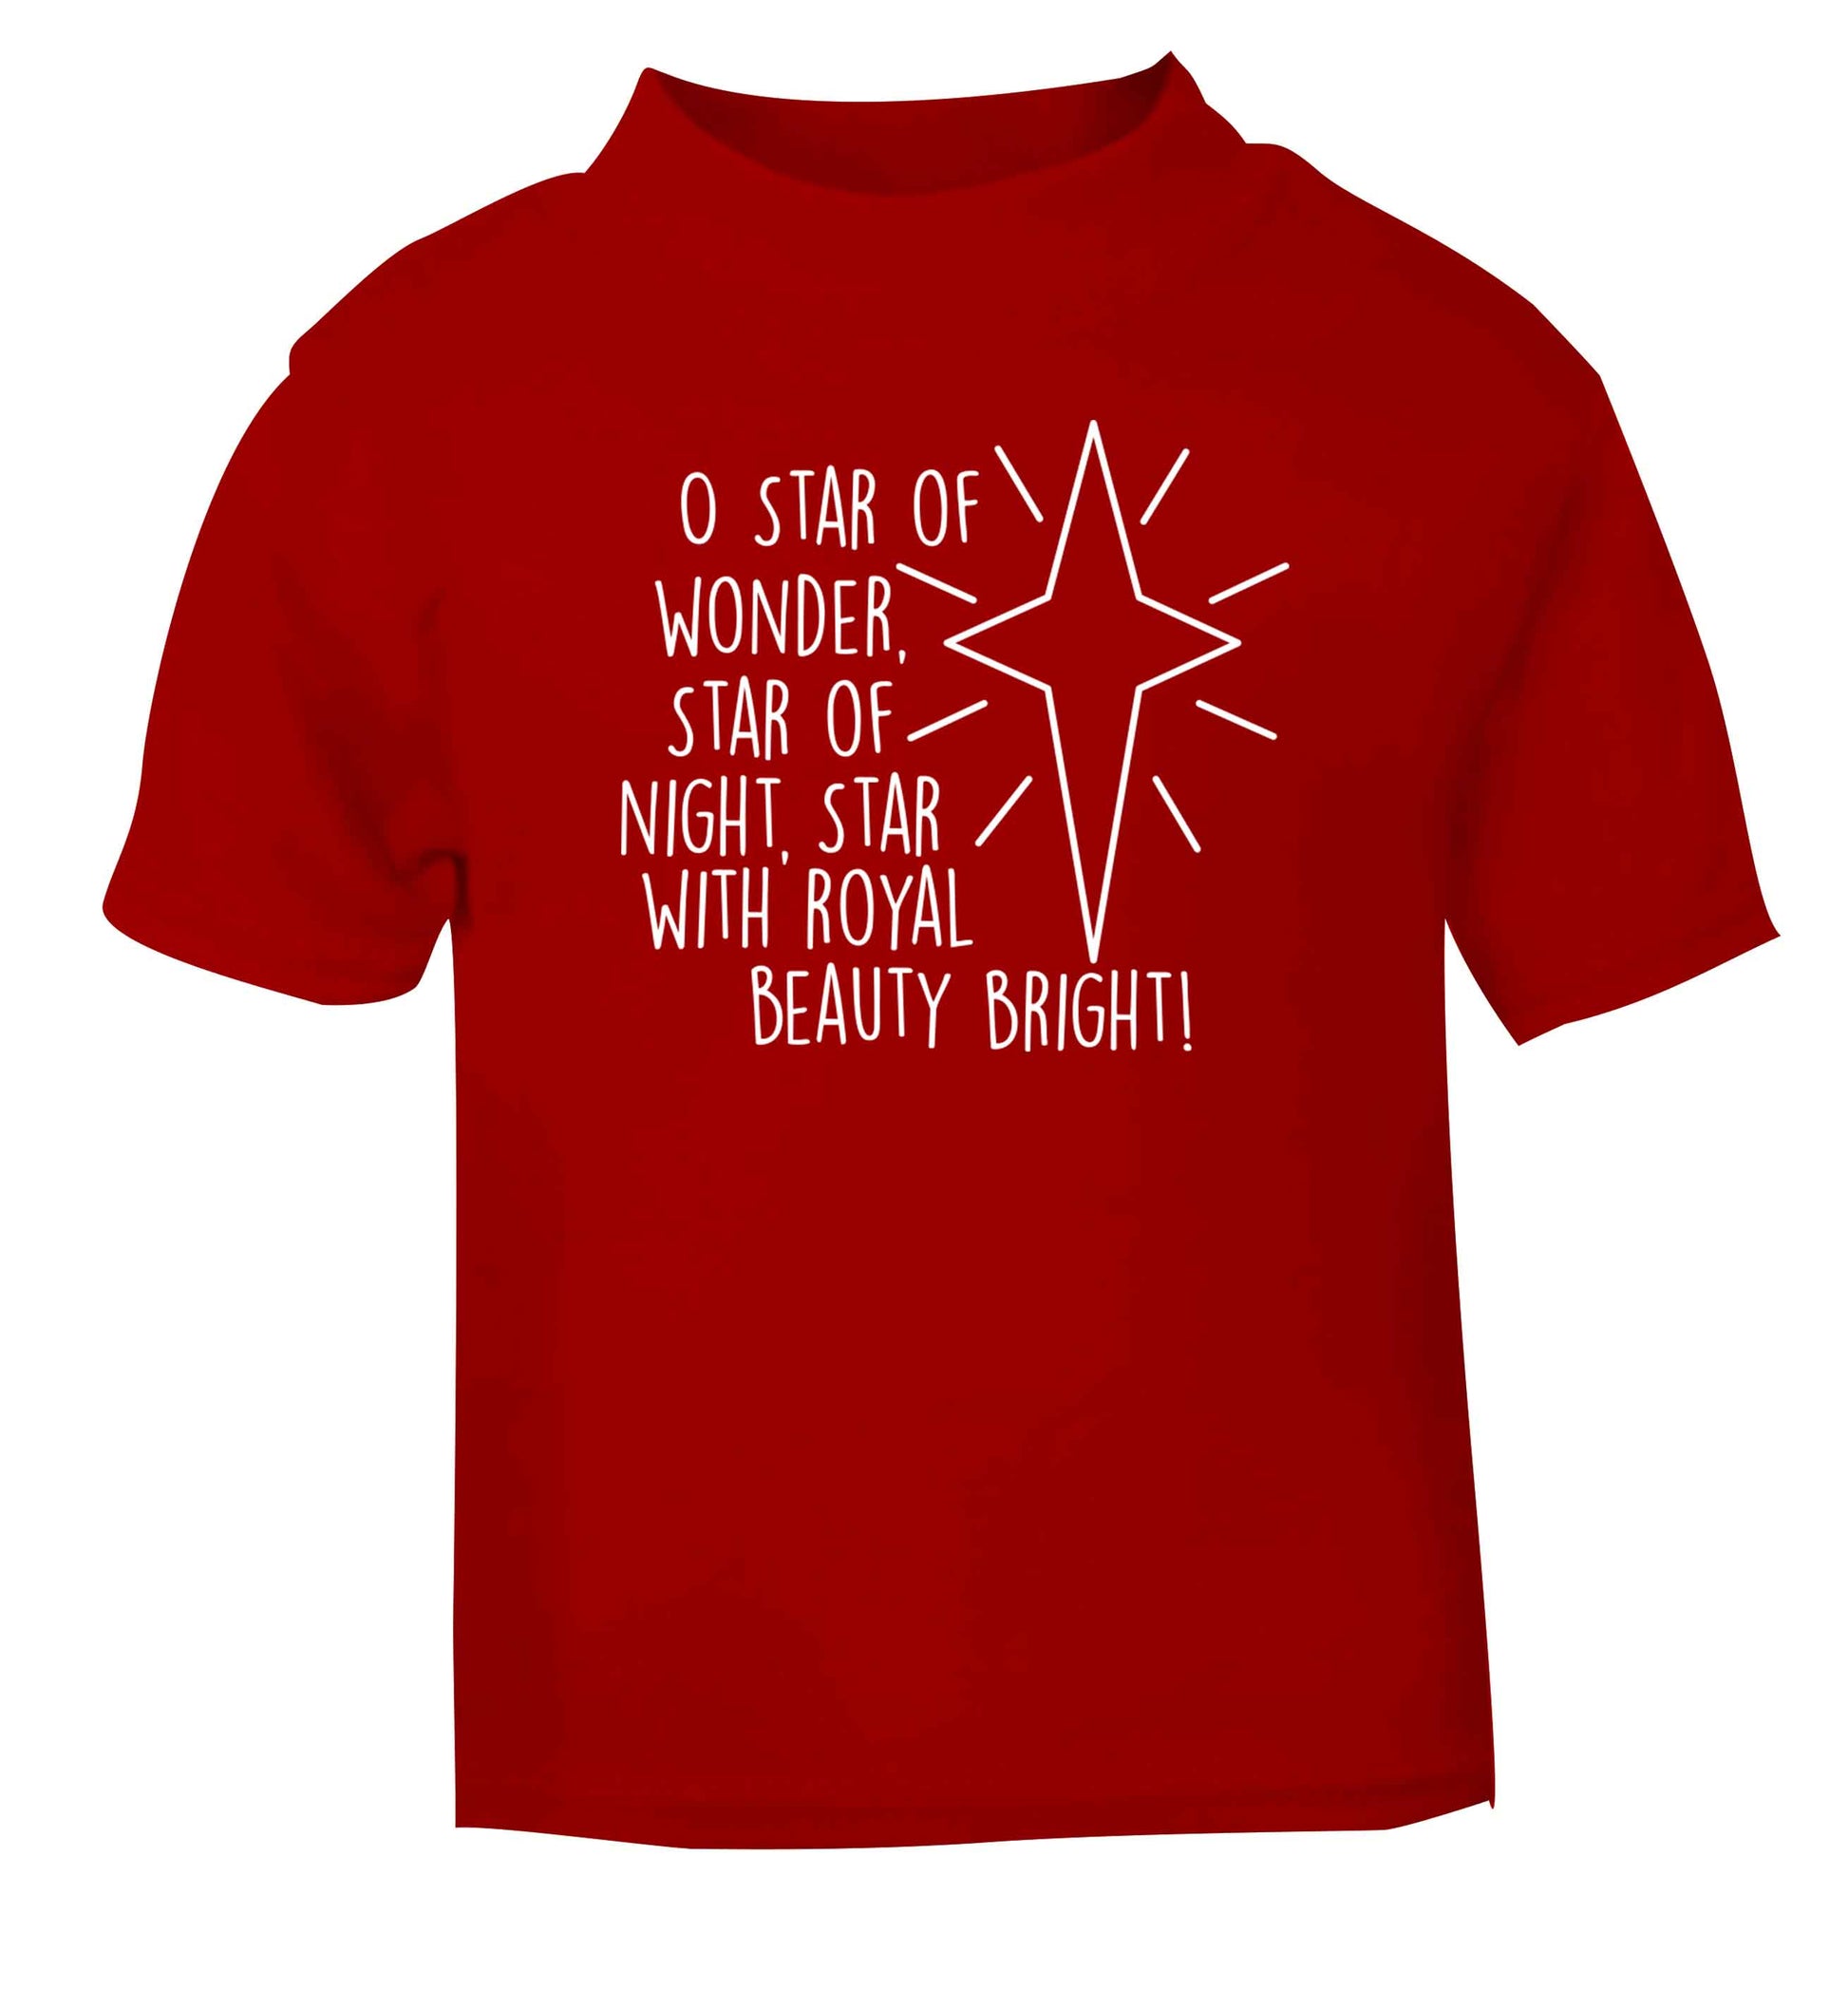 Oh star of wonder star of night, star with royal beauty bright red baby toddler Tshirt 2 Years